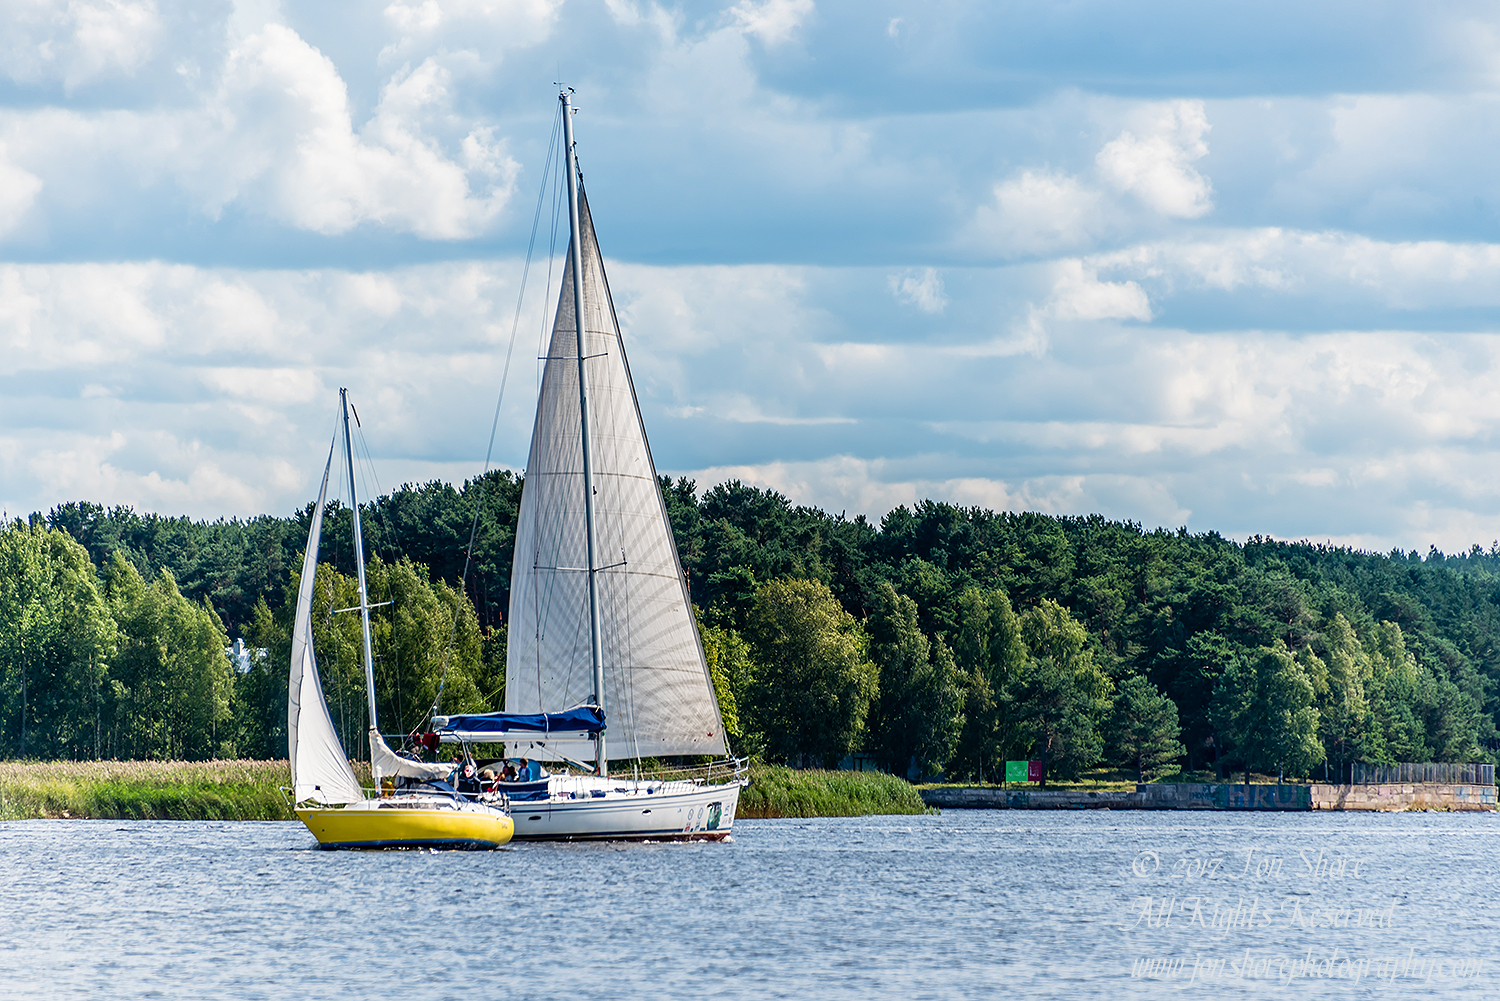 Sailboats on the Lielupe River Latvia August 2017 by Jon Shore